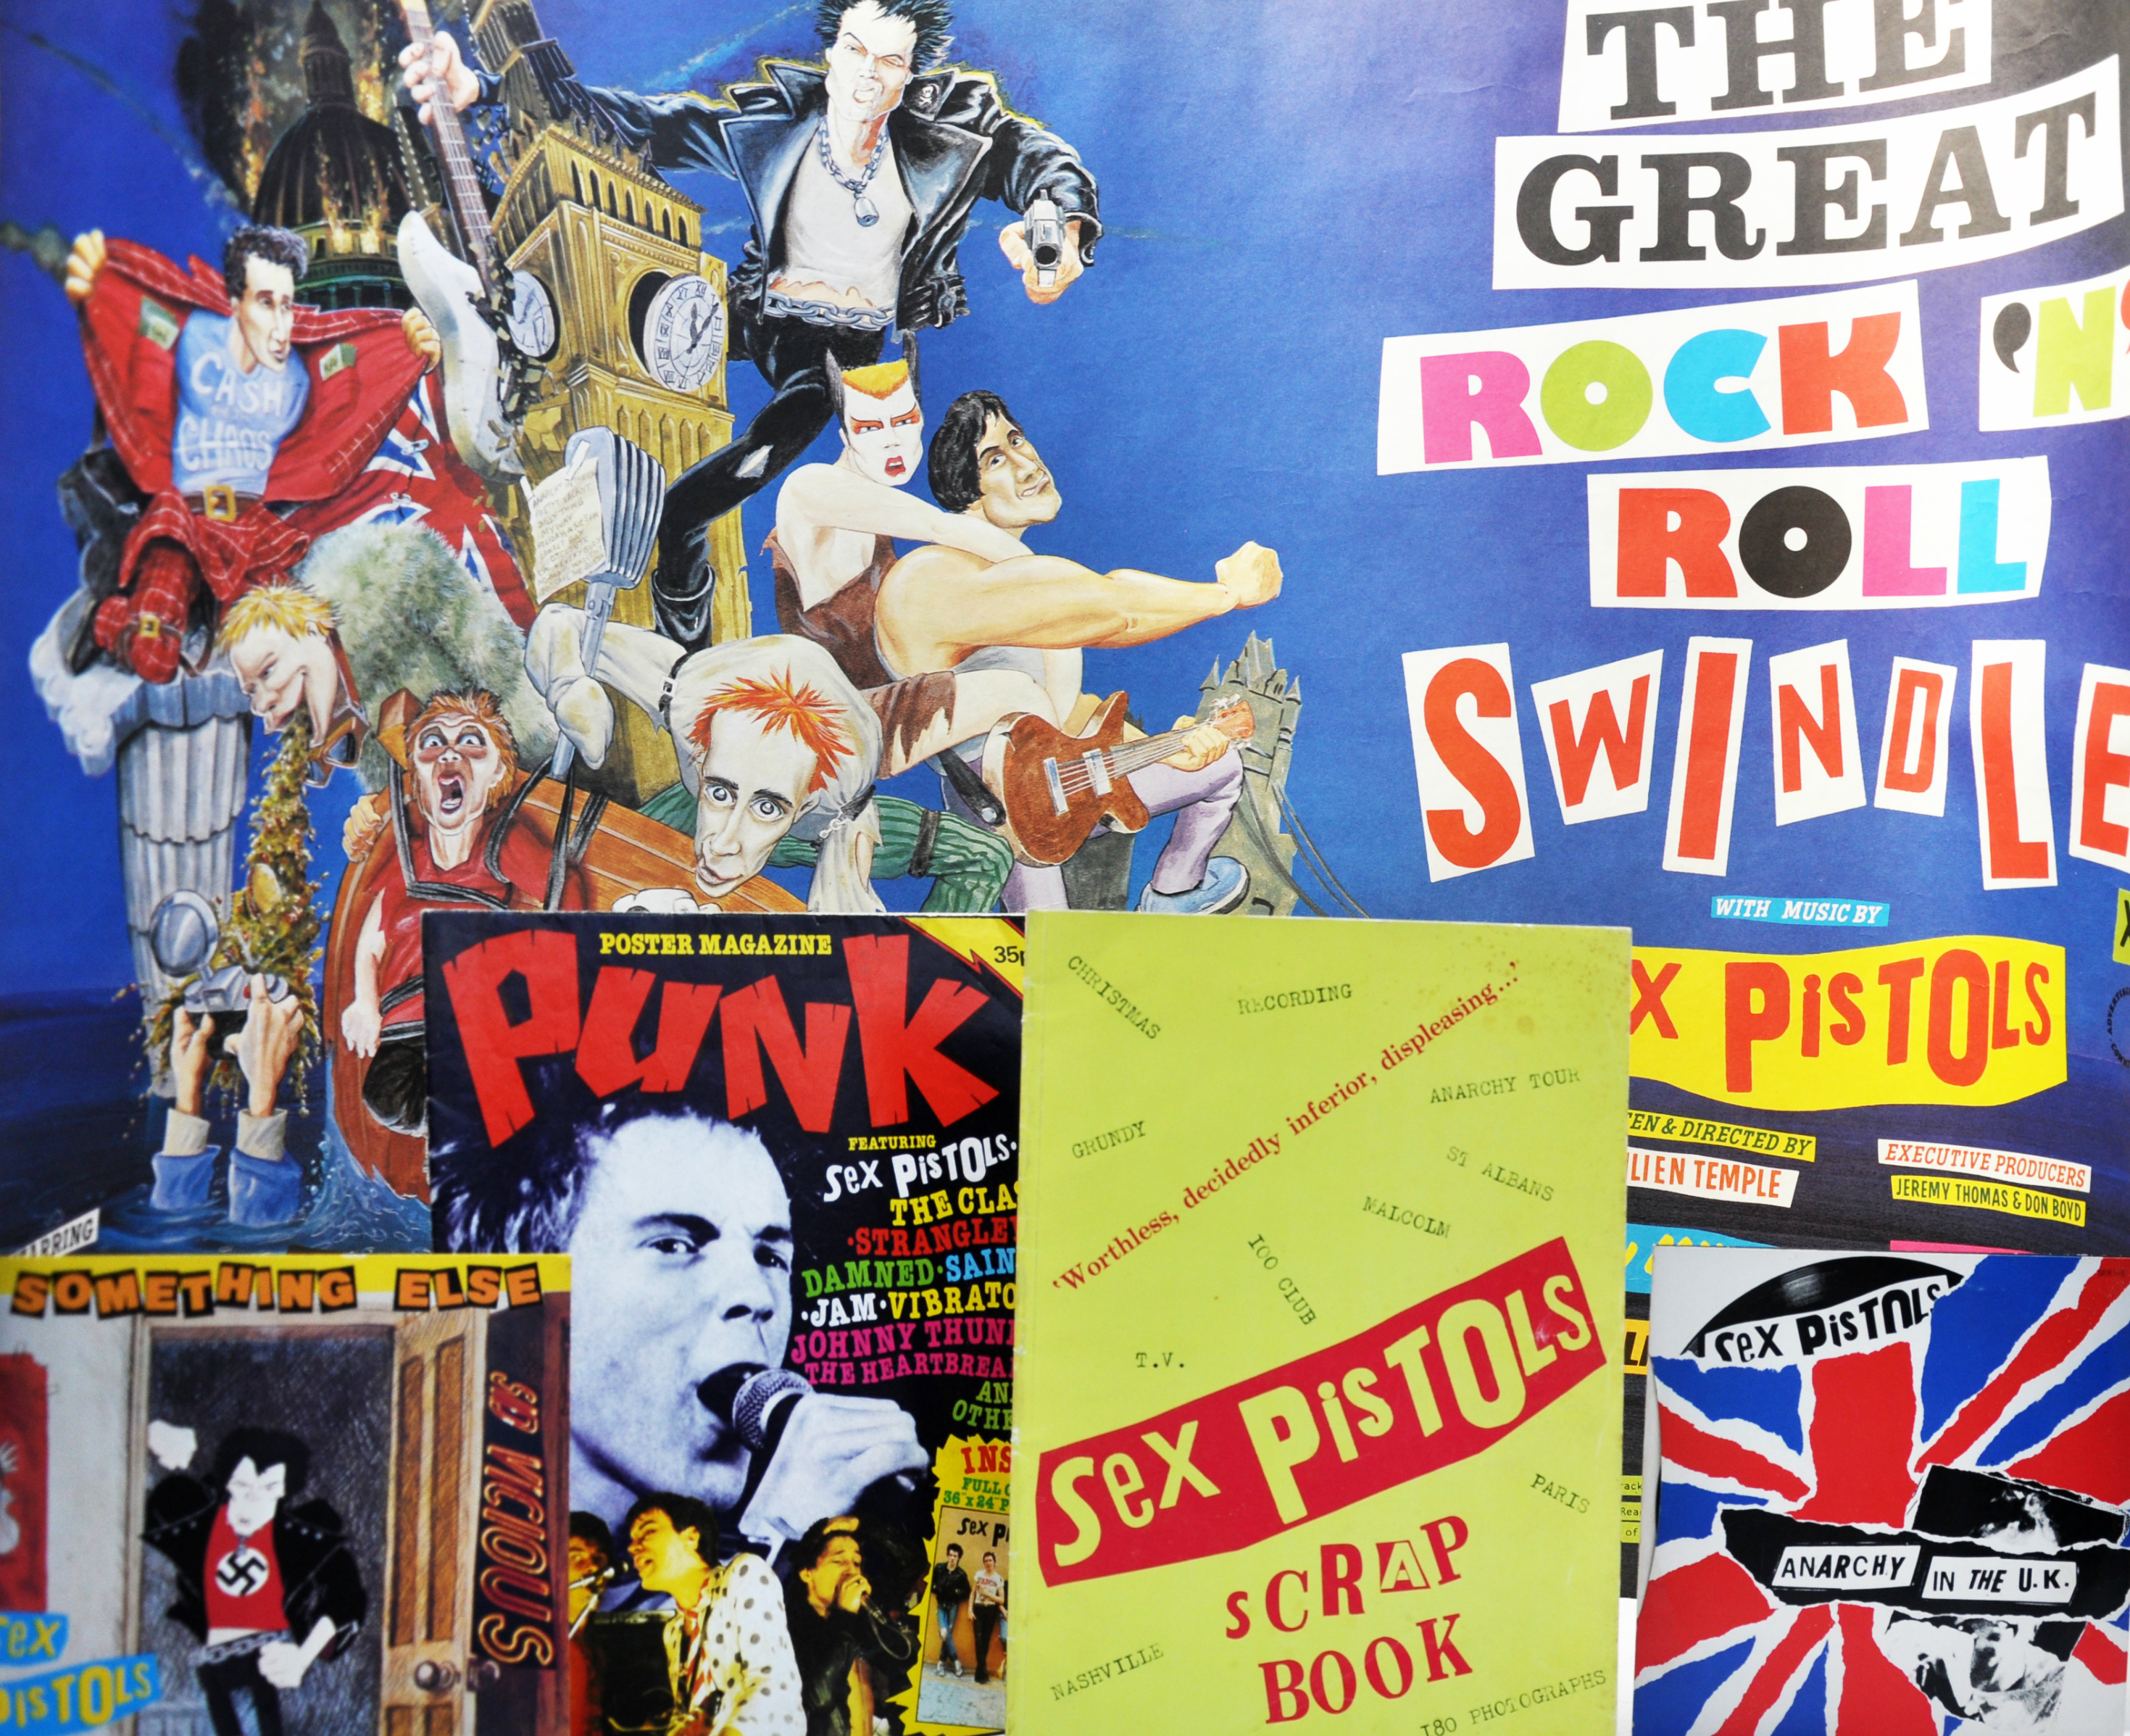 Album covers by Jamie Reid. The Six Pistol Scrapbook by Ray Stevenson. Poster Punk Magazine and The Great Rock ‘n’ Roll Swindle Poster by M Hirsch.